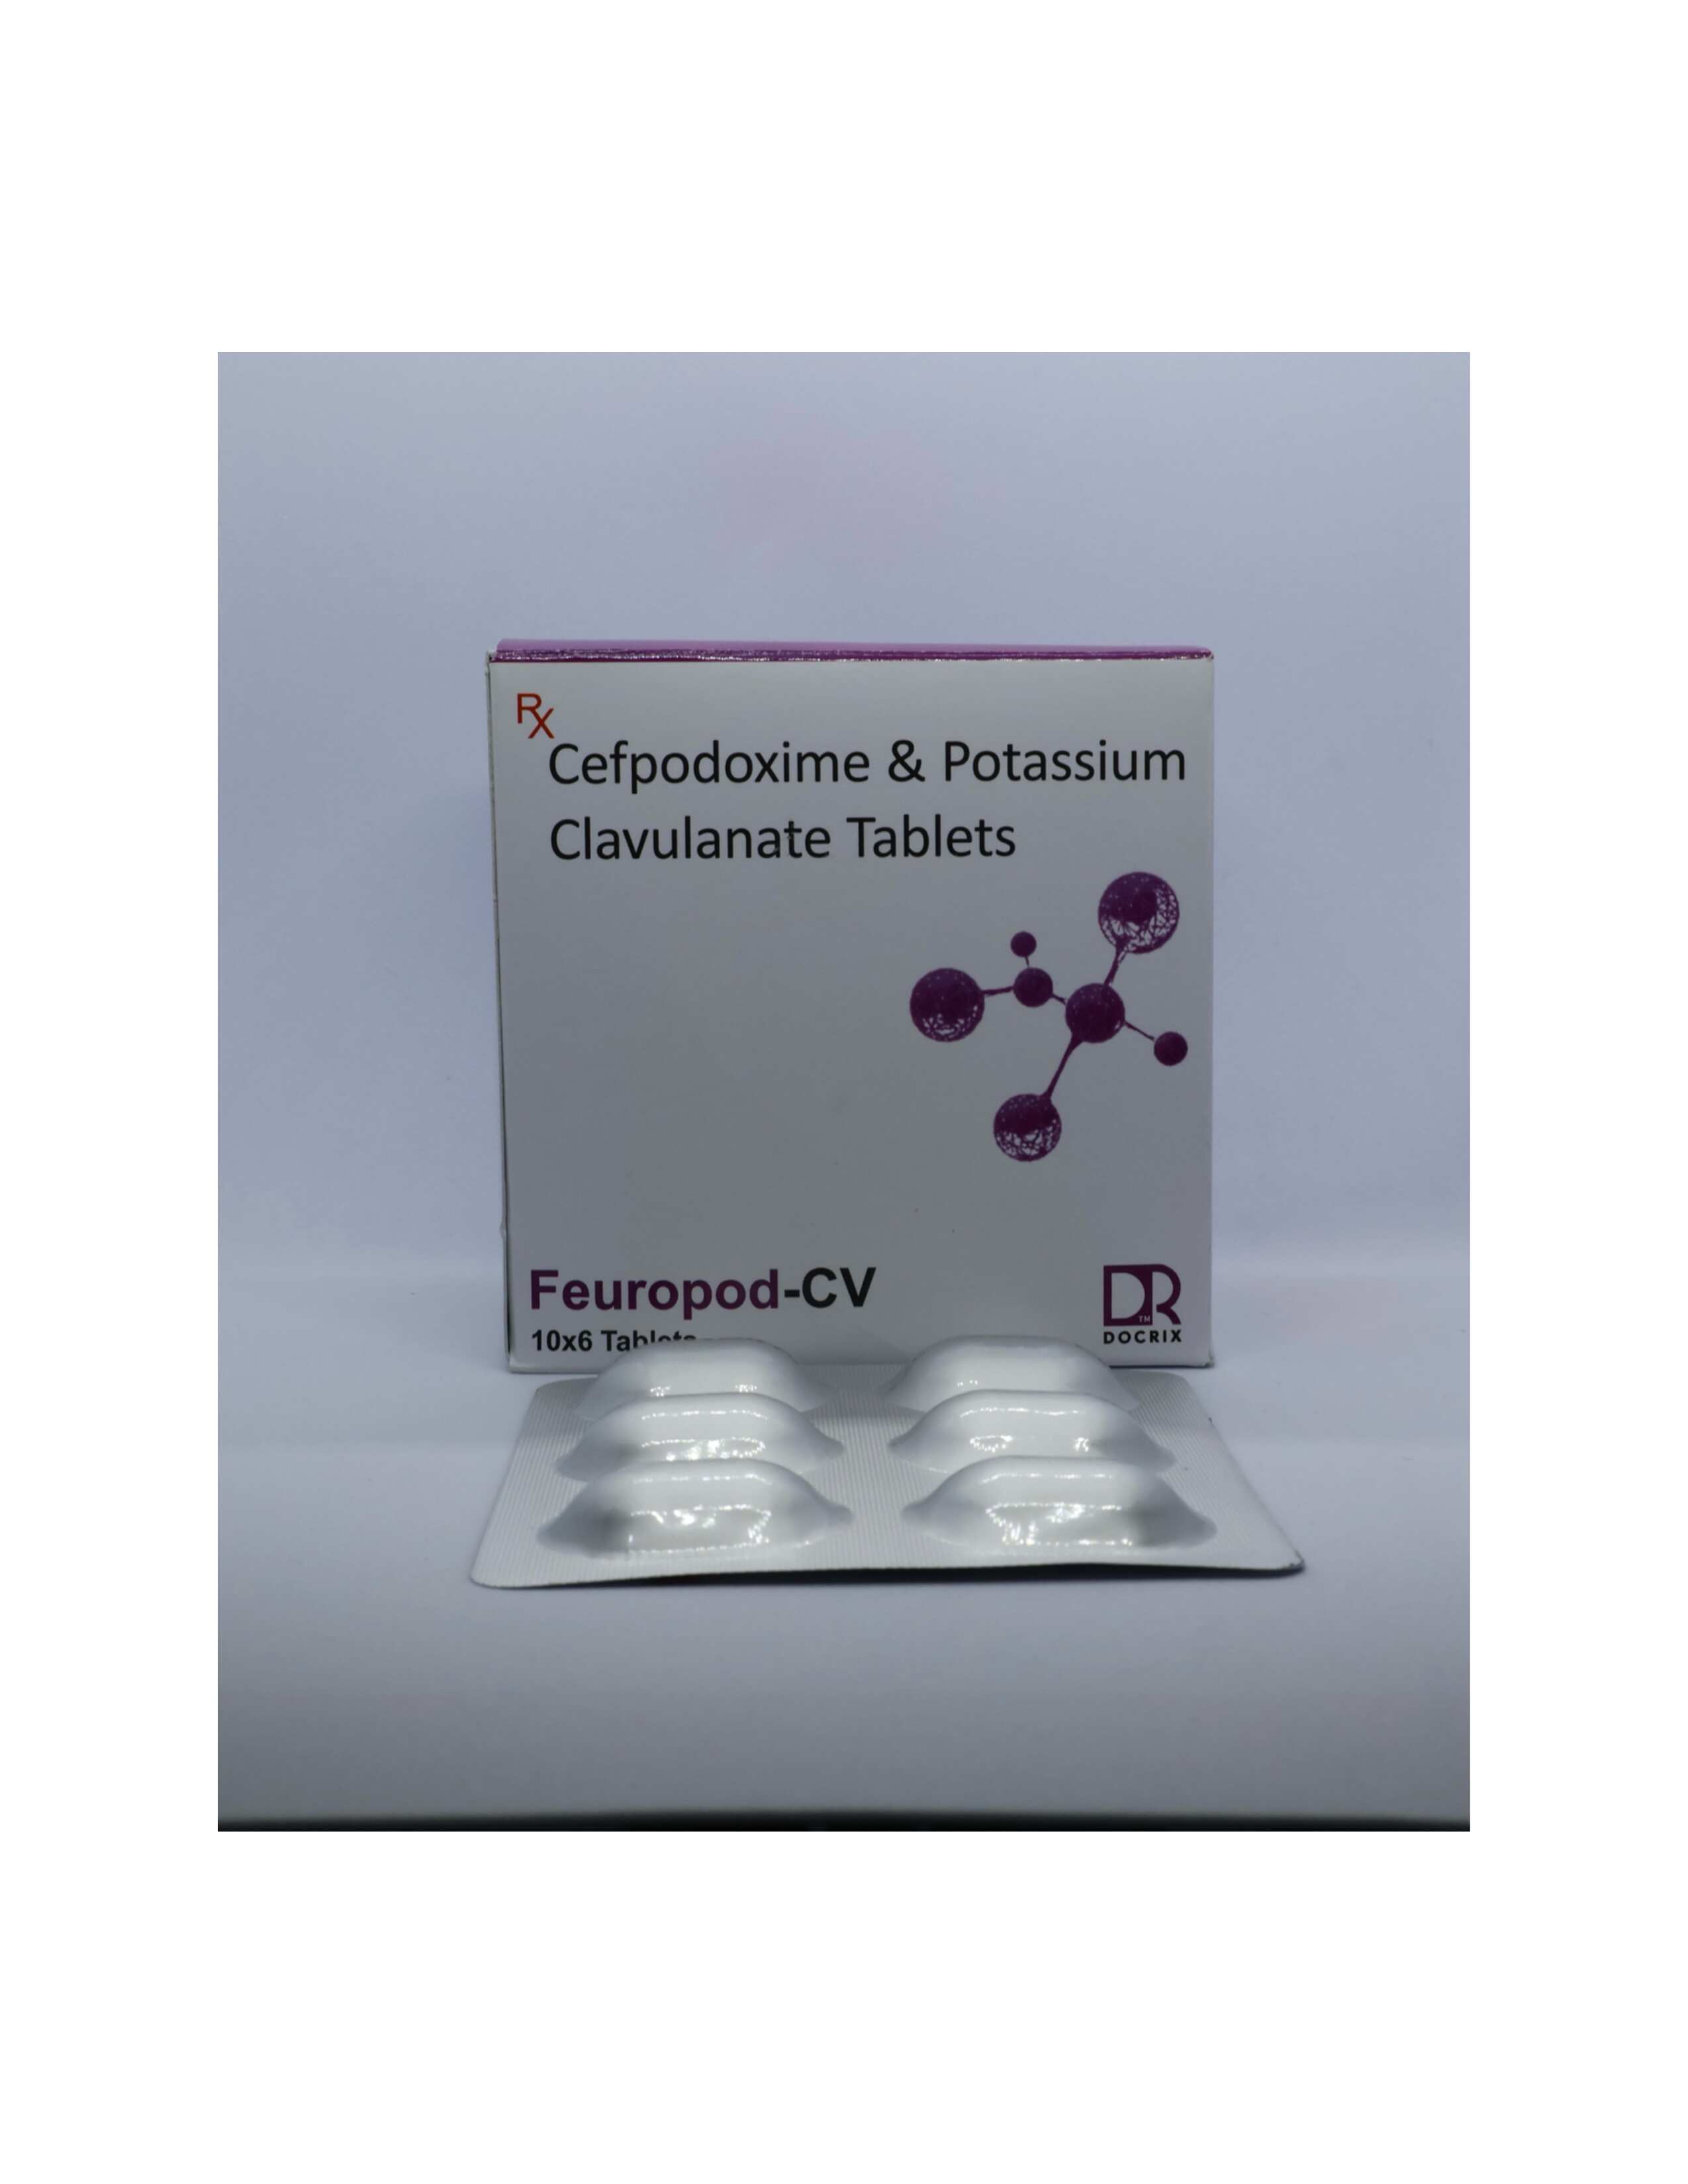 Product Name: Feuropod CV, Compositions of Feuropod CV are Cefpodoxime & Potassium Clavulanate  Tablets - Docrix Healthcare